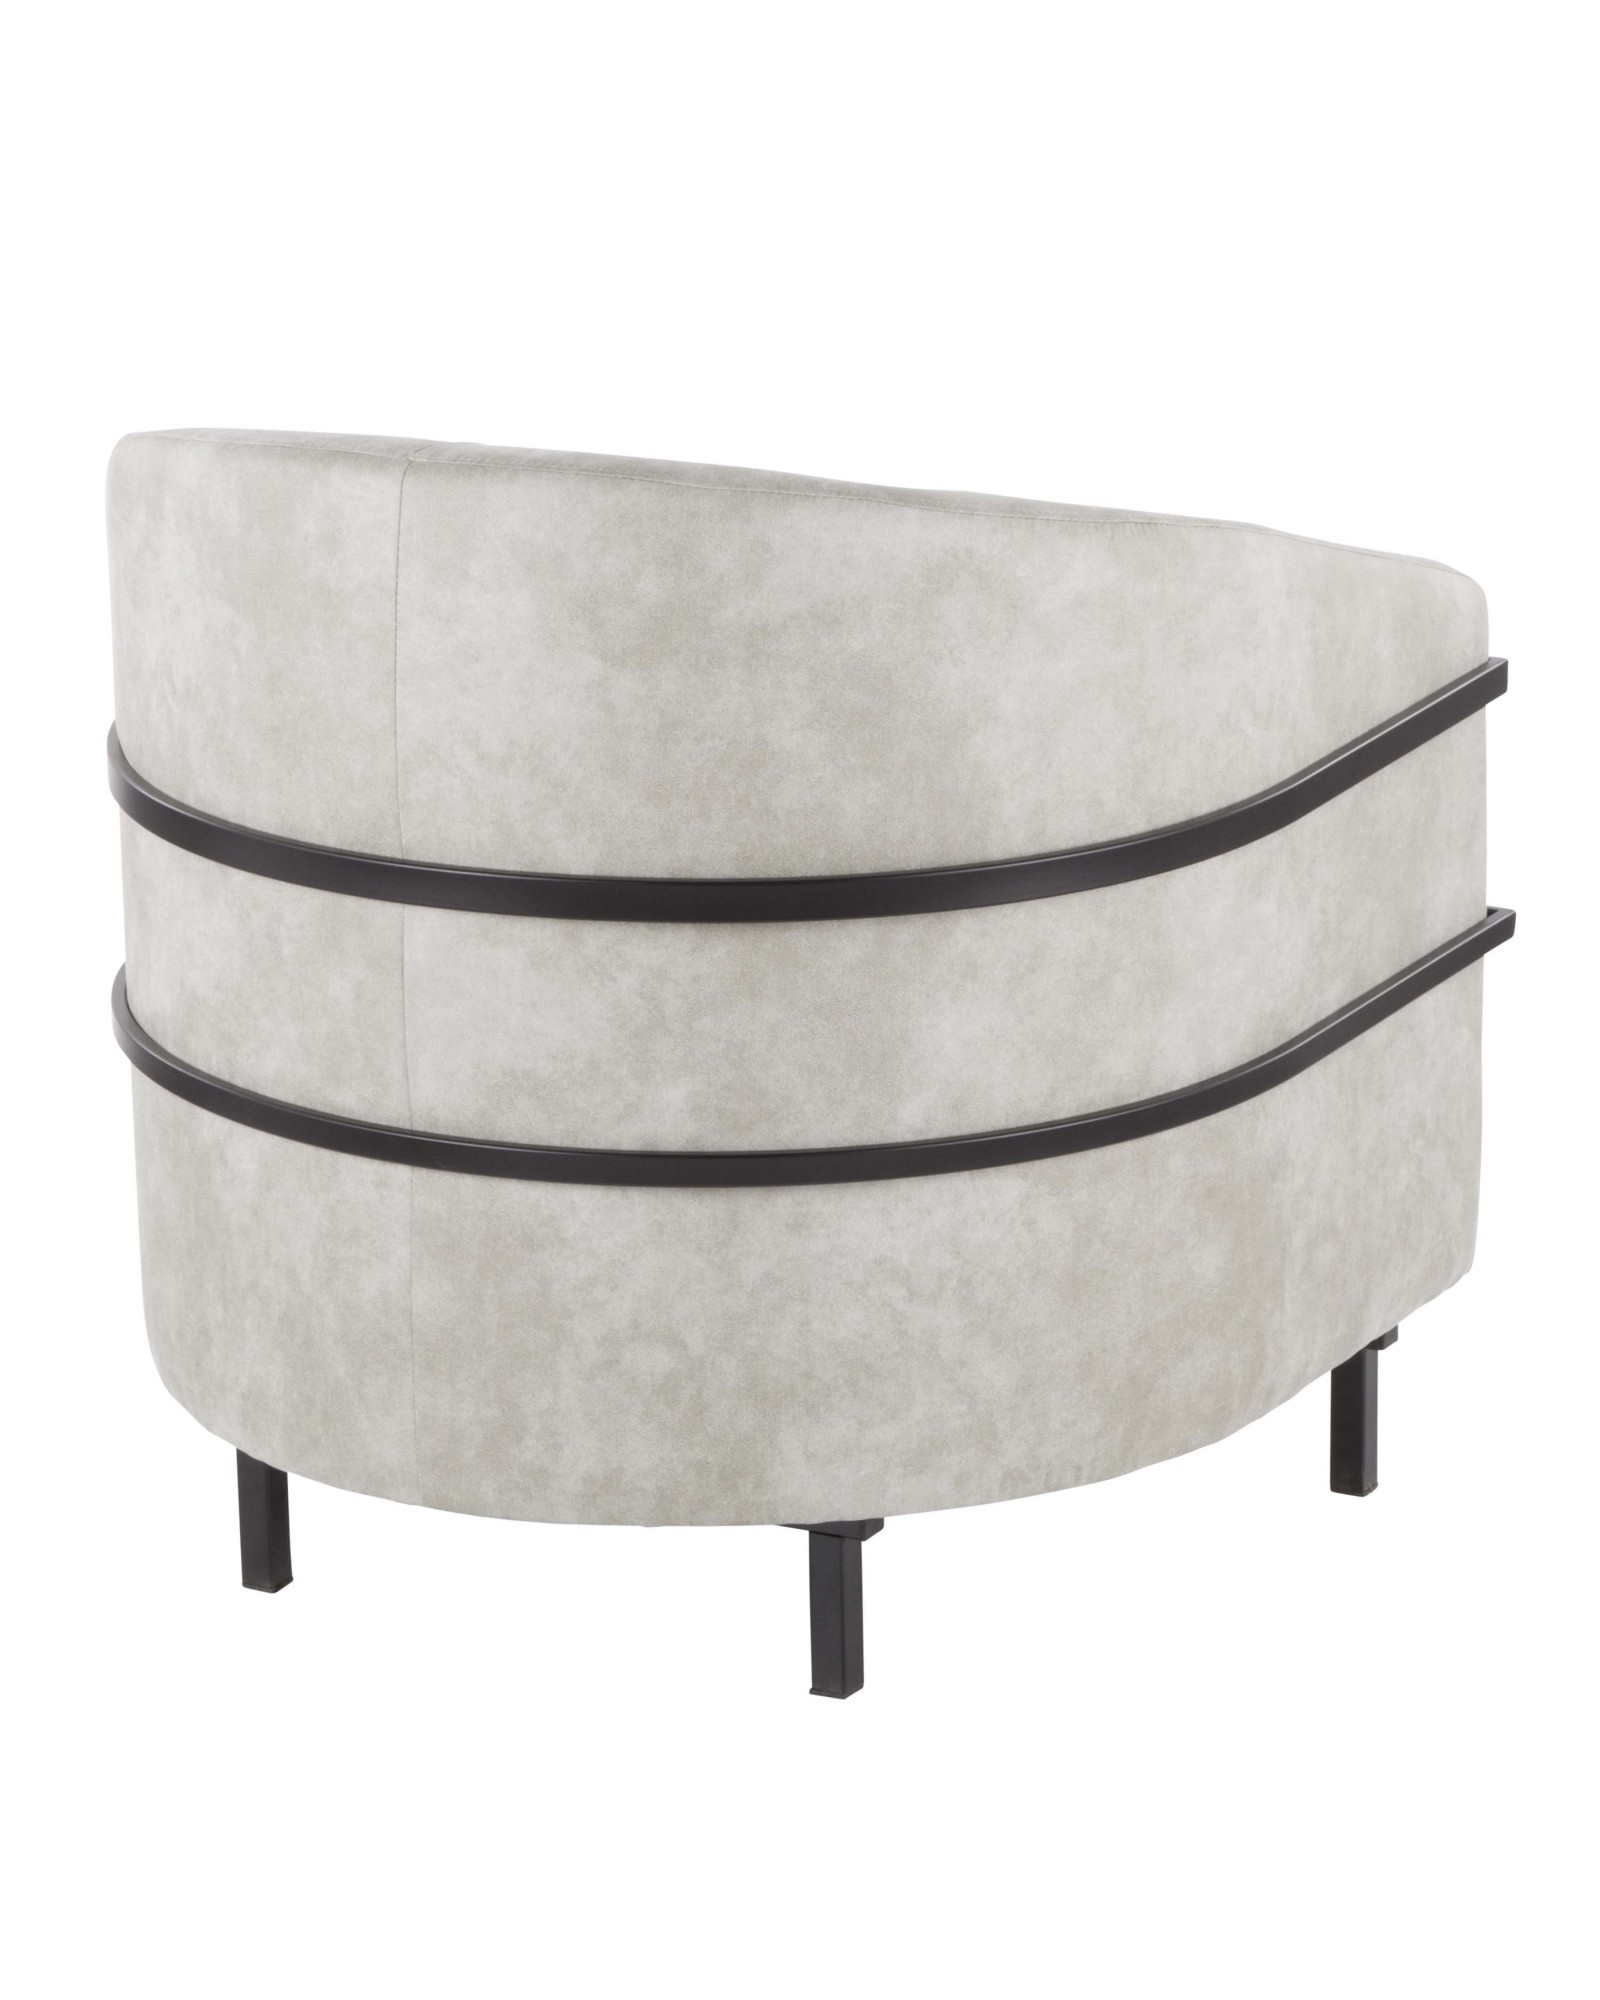 Colby Industrial Tub Chair in Black with Light Grey Cowboy Fabric